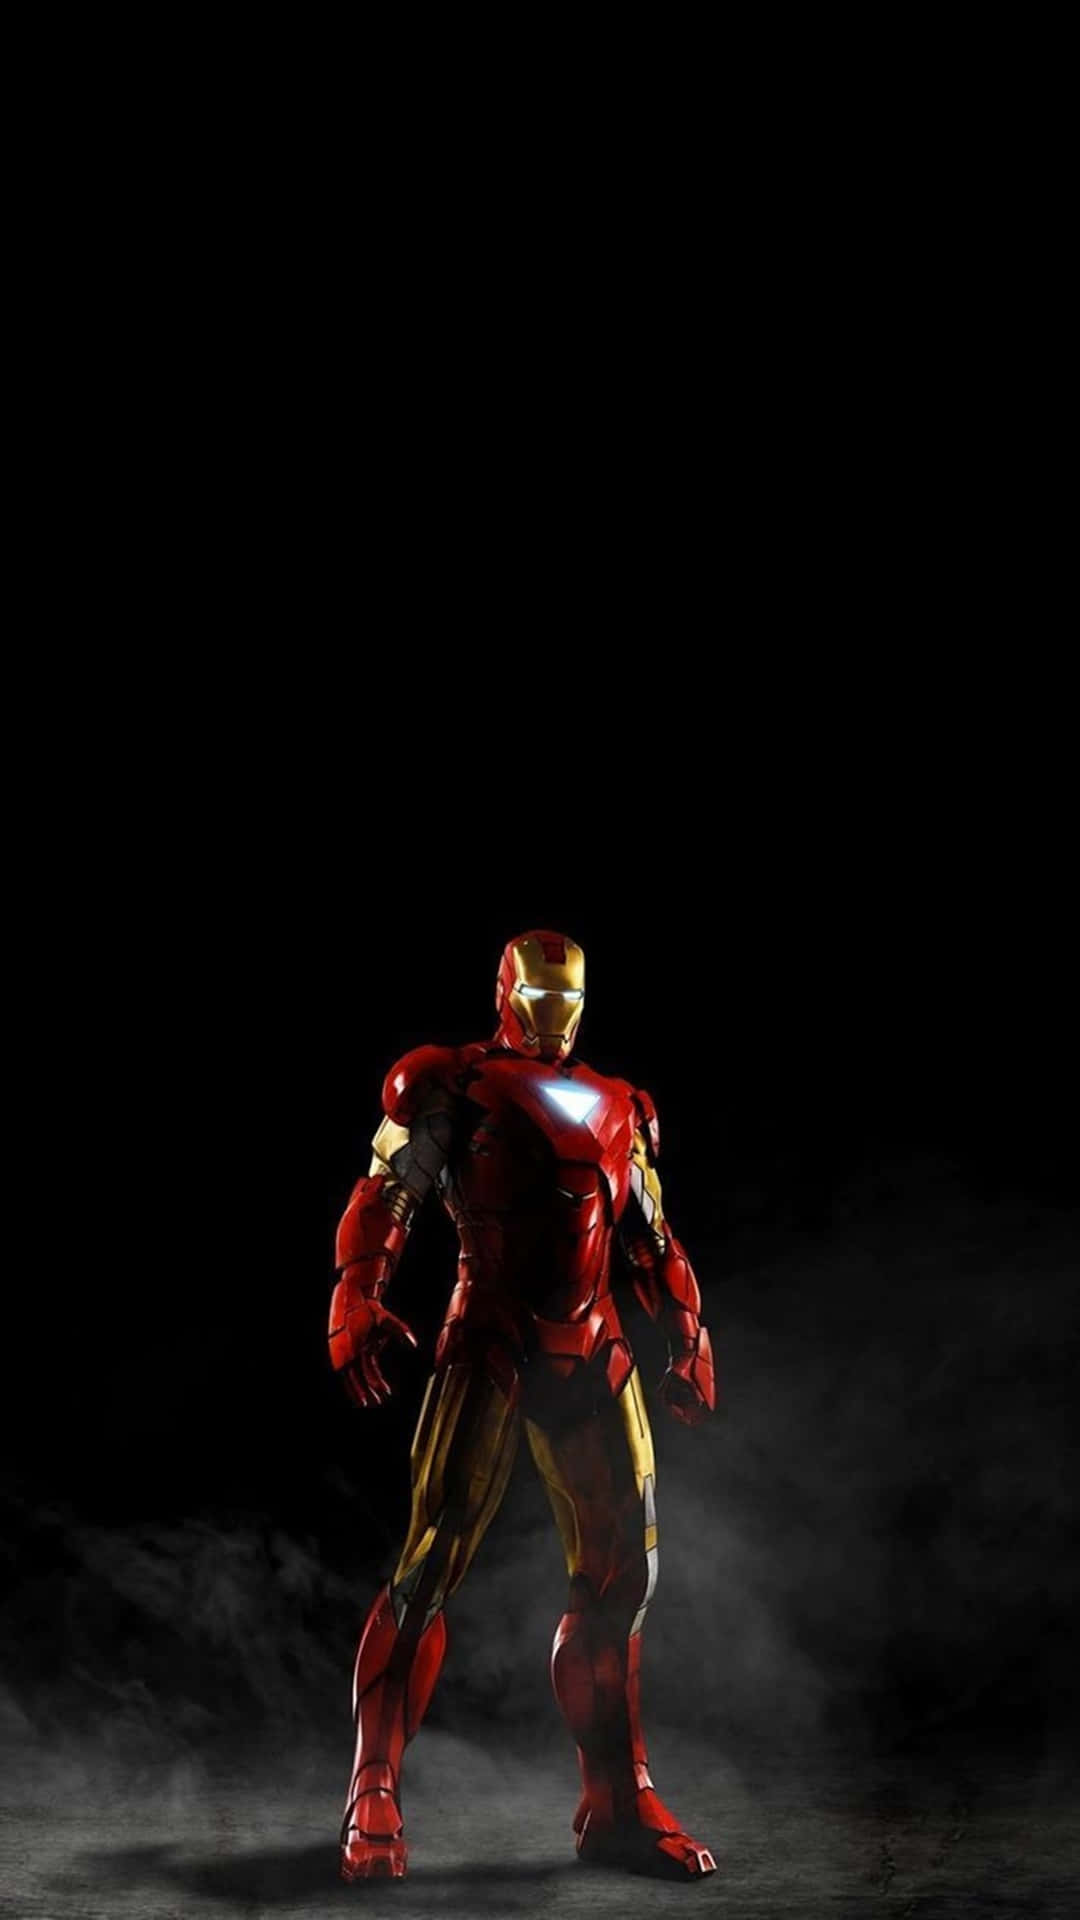 The Powerful Iron Man in 4K Mobile Wallpaper